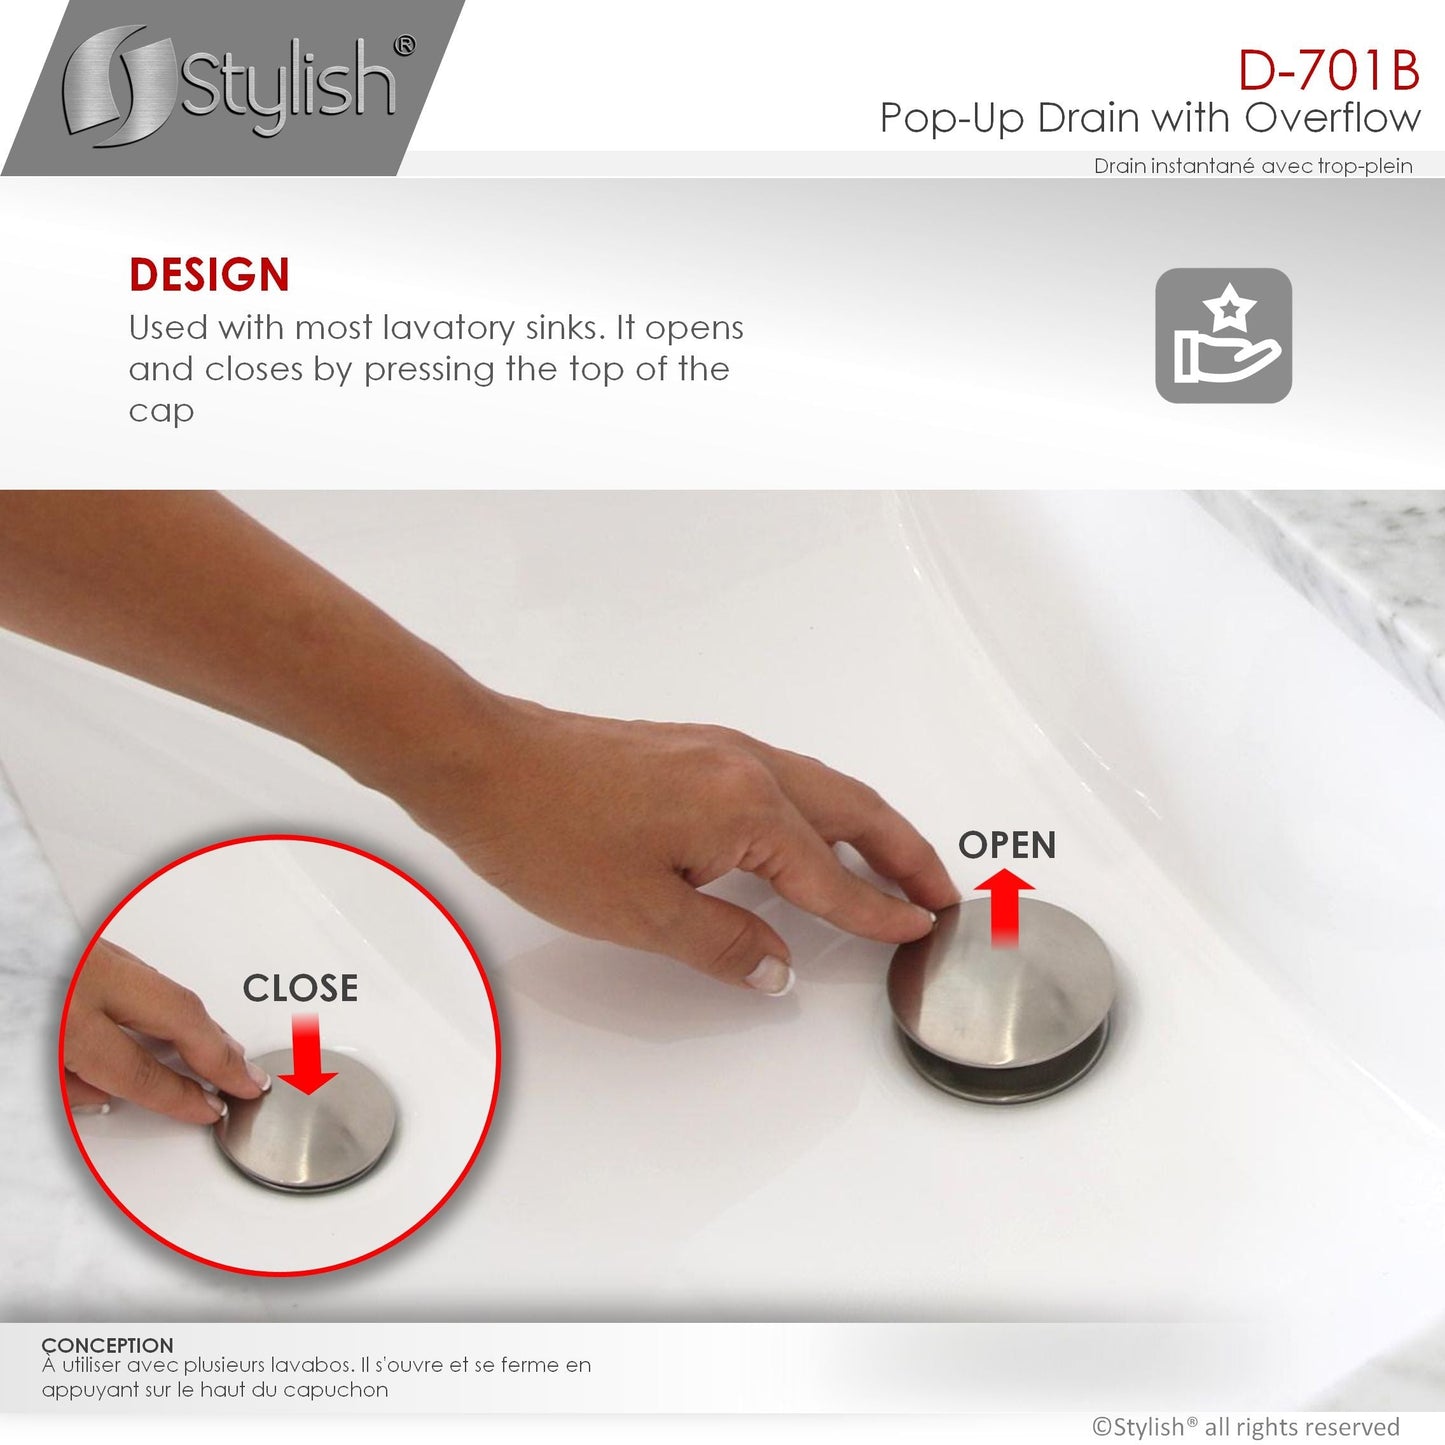 Stylish Pop-Up Drain with Overflow, Brushed Nickel Finish D-701B